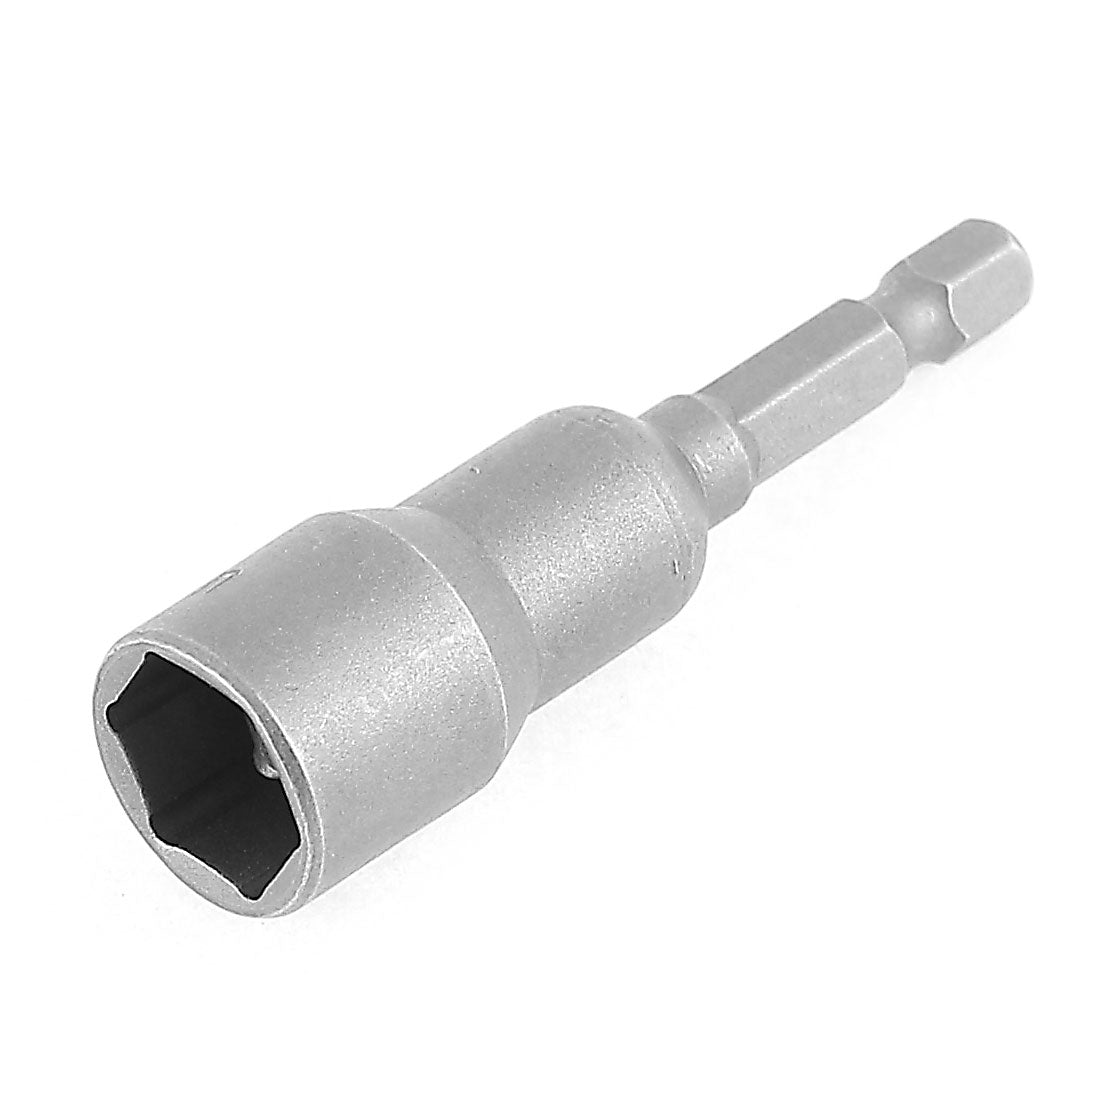 uxcell Uxcell 13mm Socket Magnetic Nut Driver Setter Adapter Hex Bit Gray